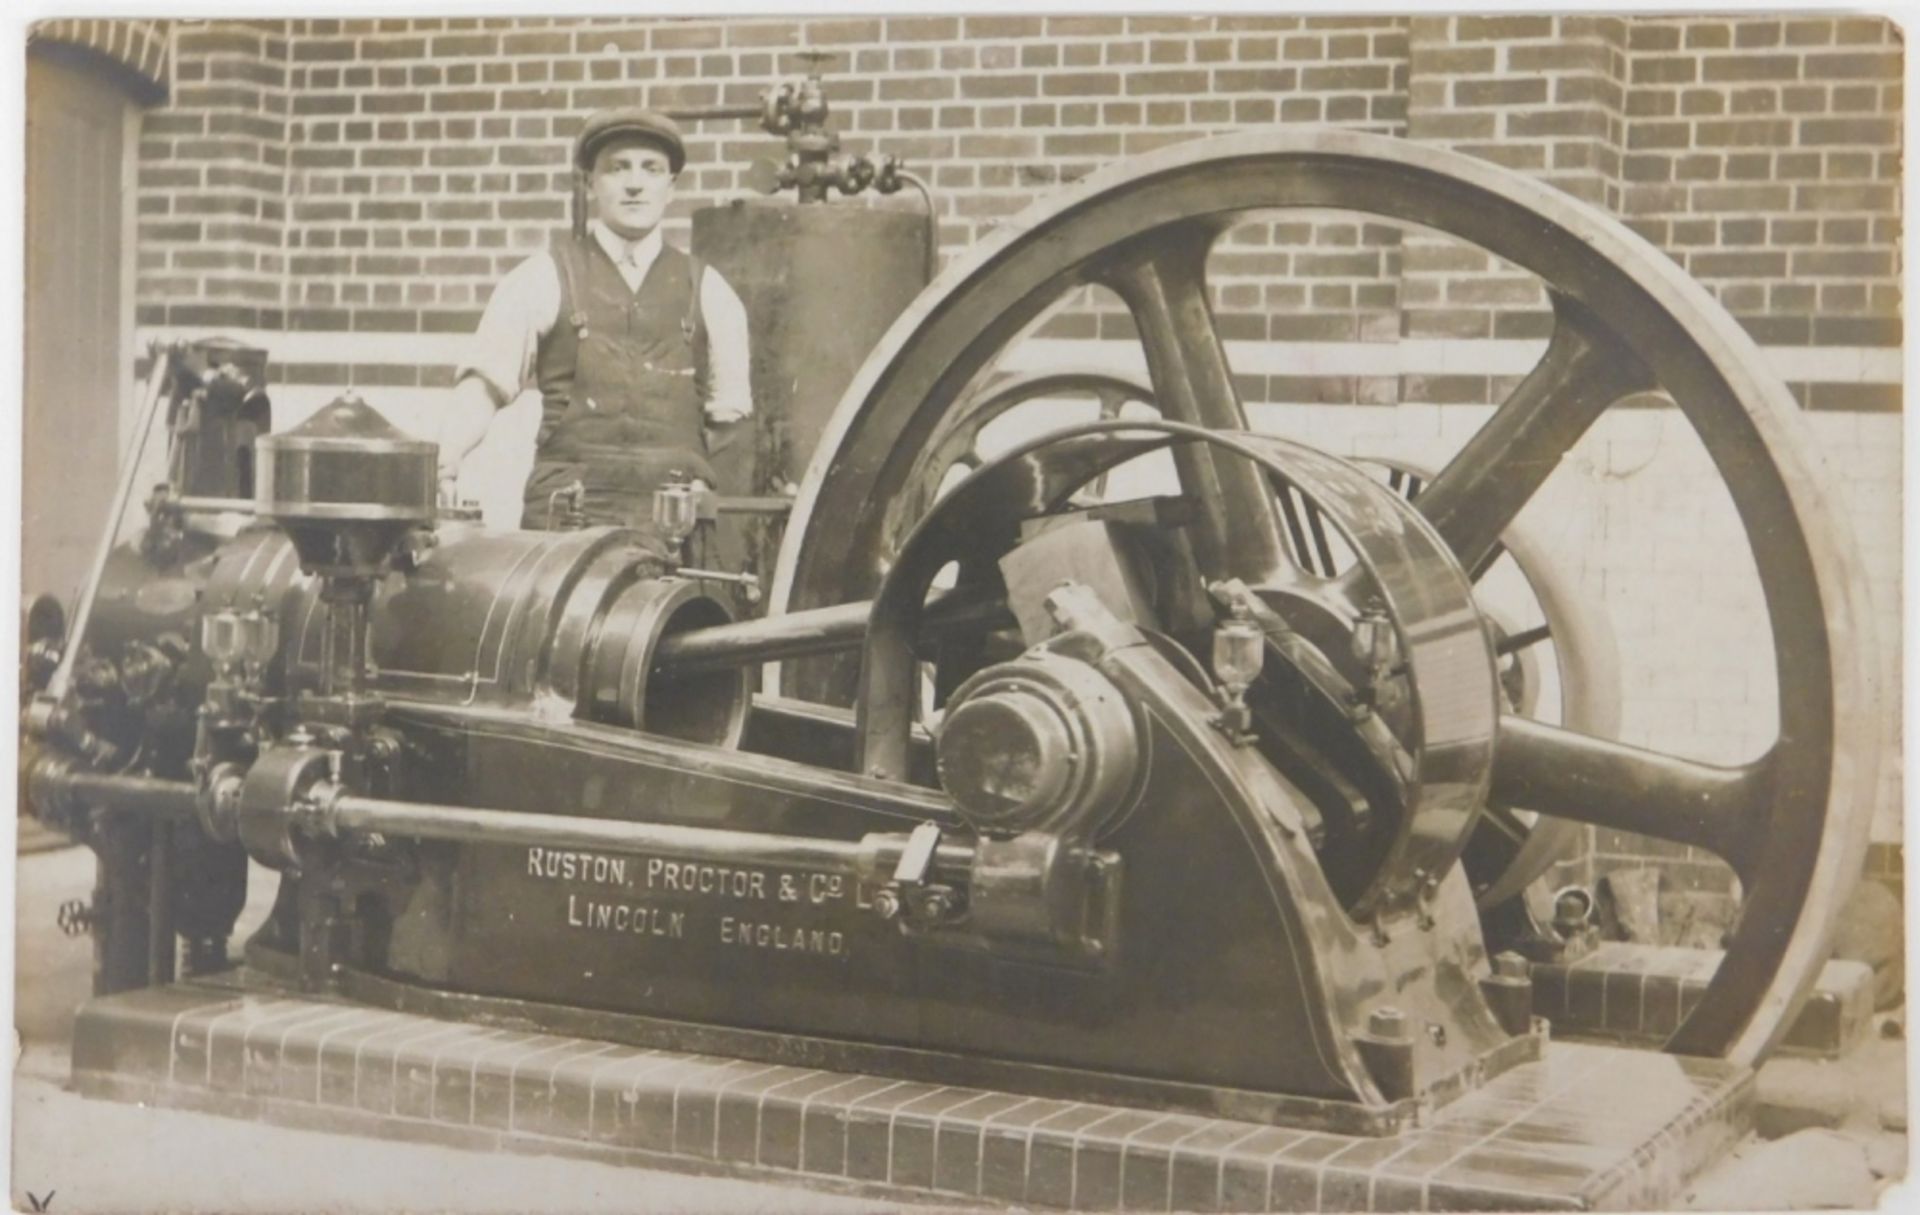 An early 20thC Ruston Proctor & Co Lincoln stationary engine postcard, date marked 1916, 9cm x 14cm.